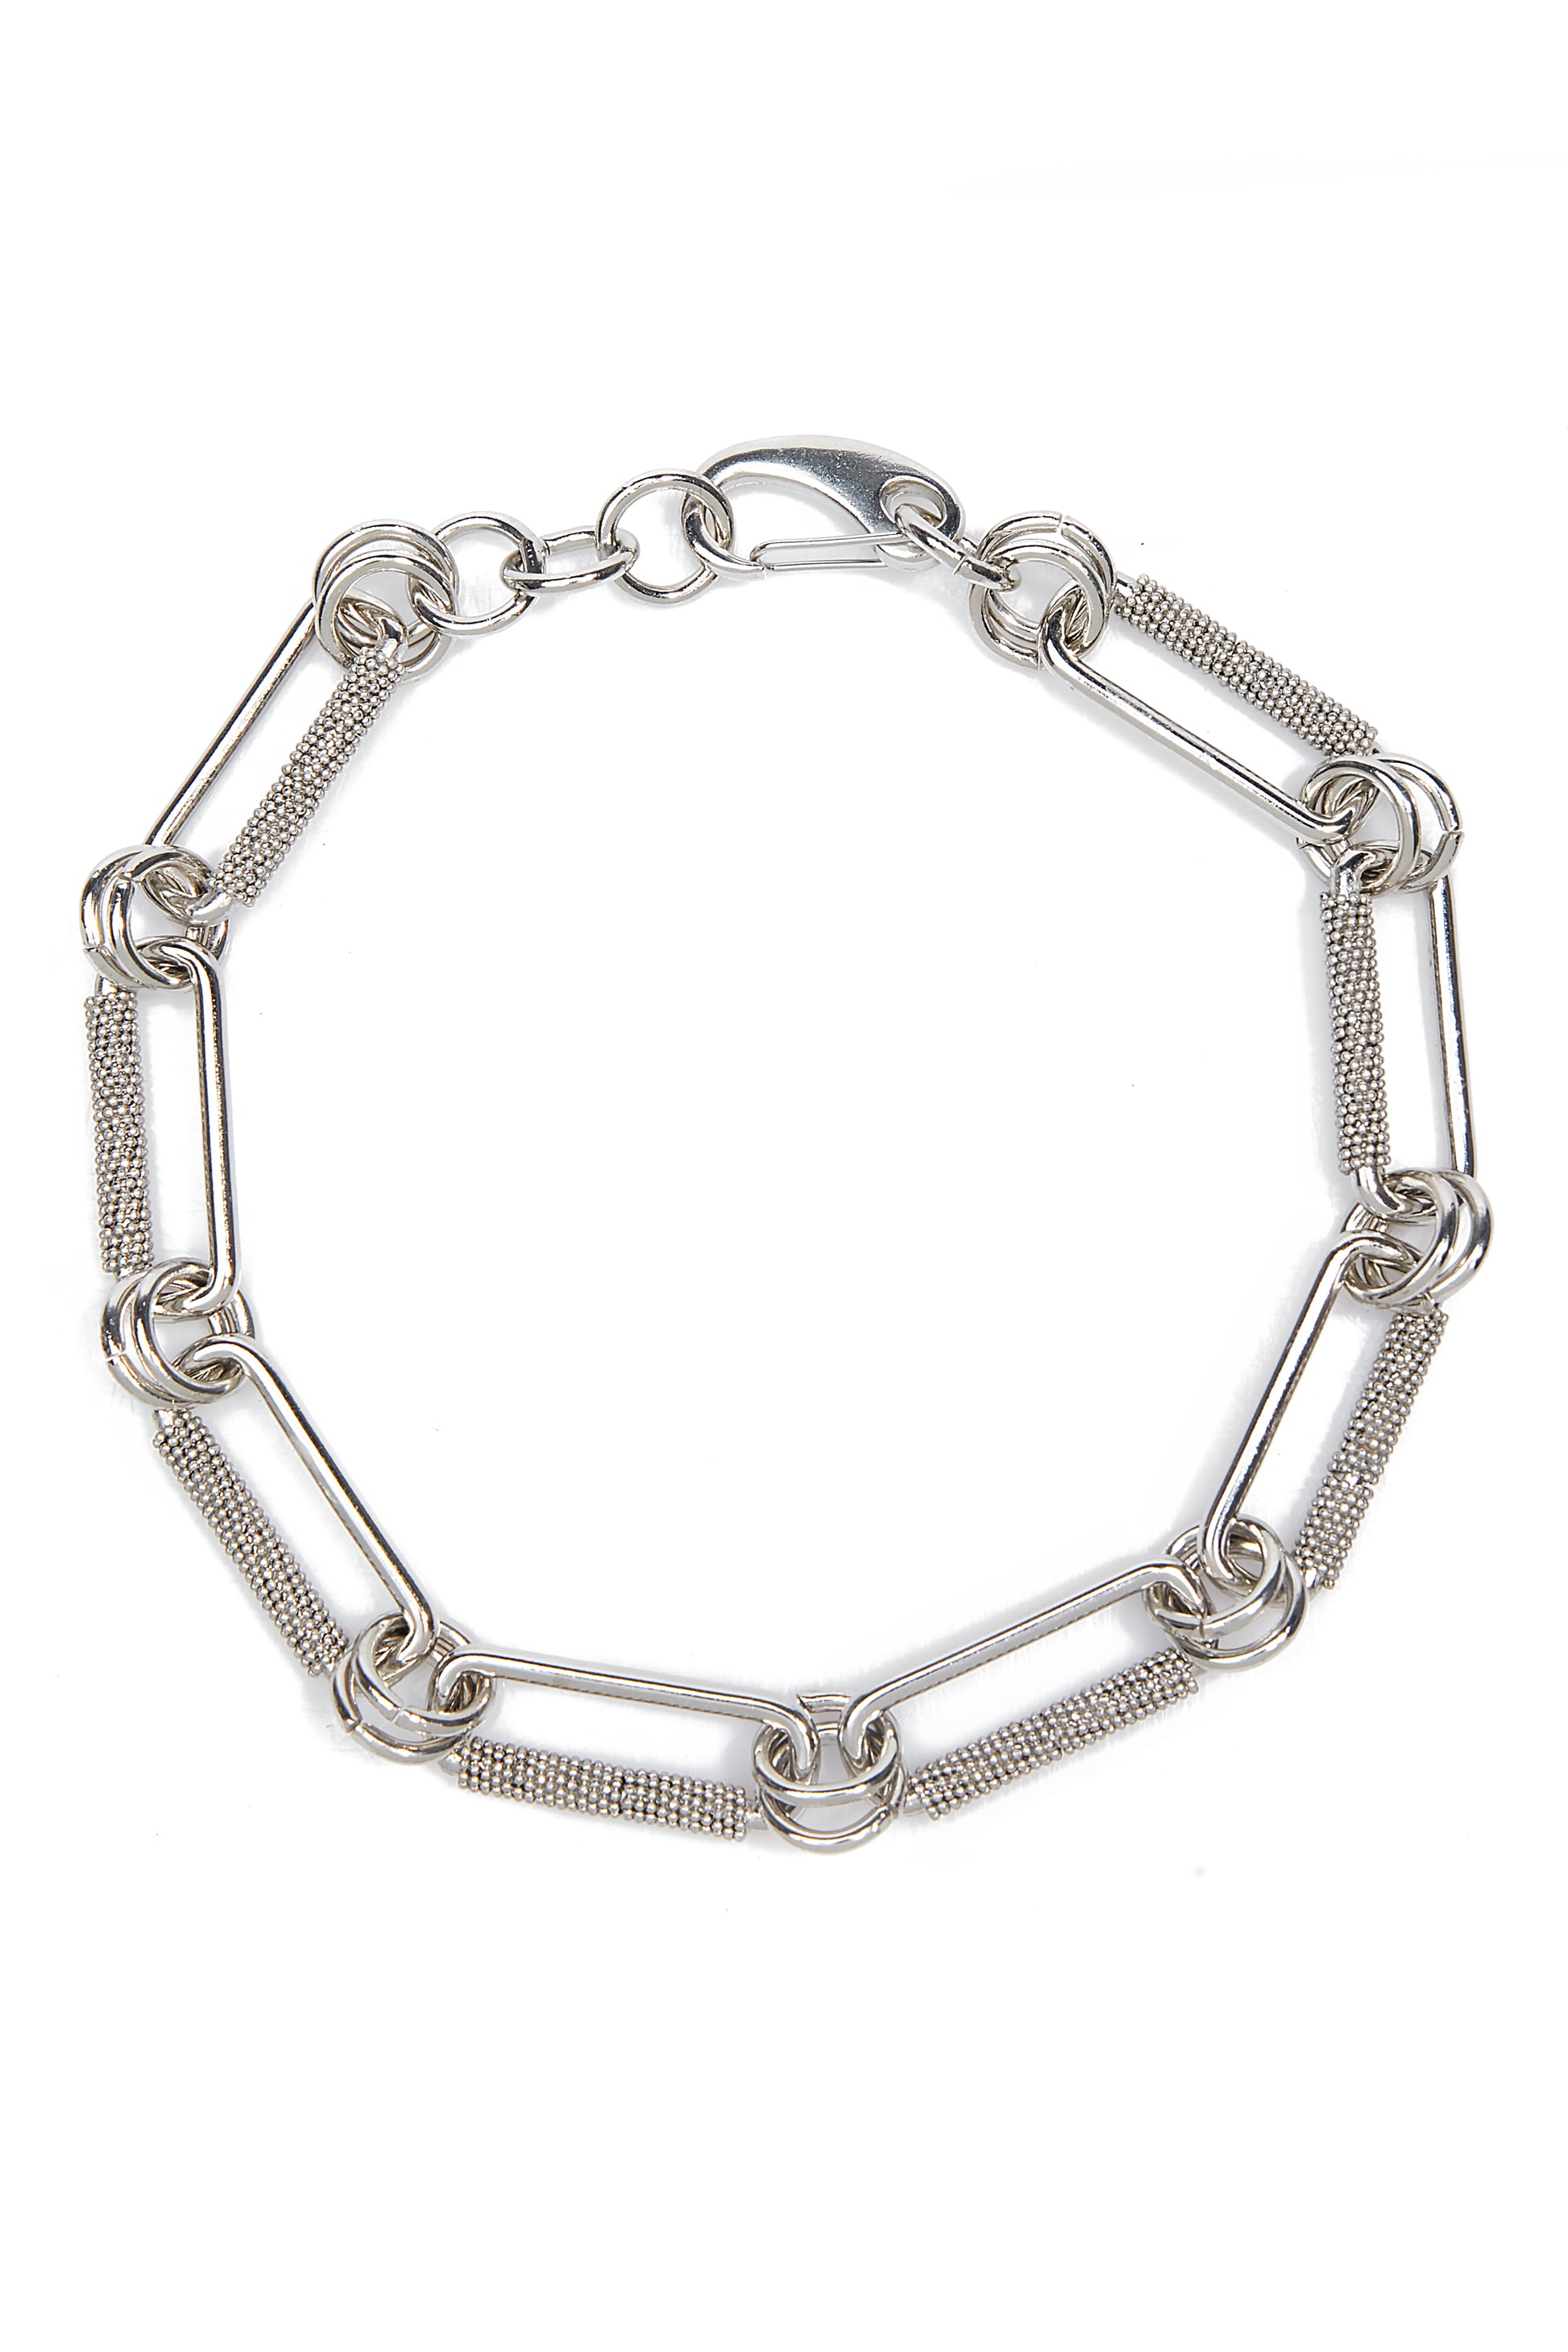 FABIANA FILIPPI Large Chain Link Necklace in Nickel